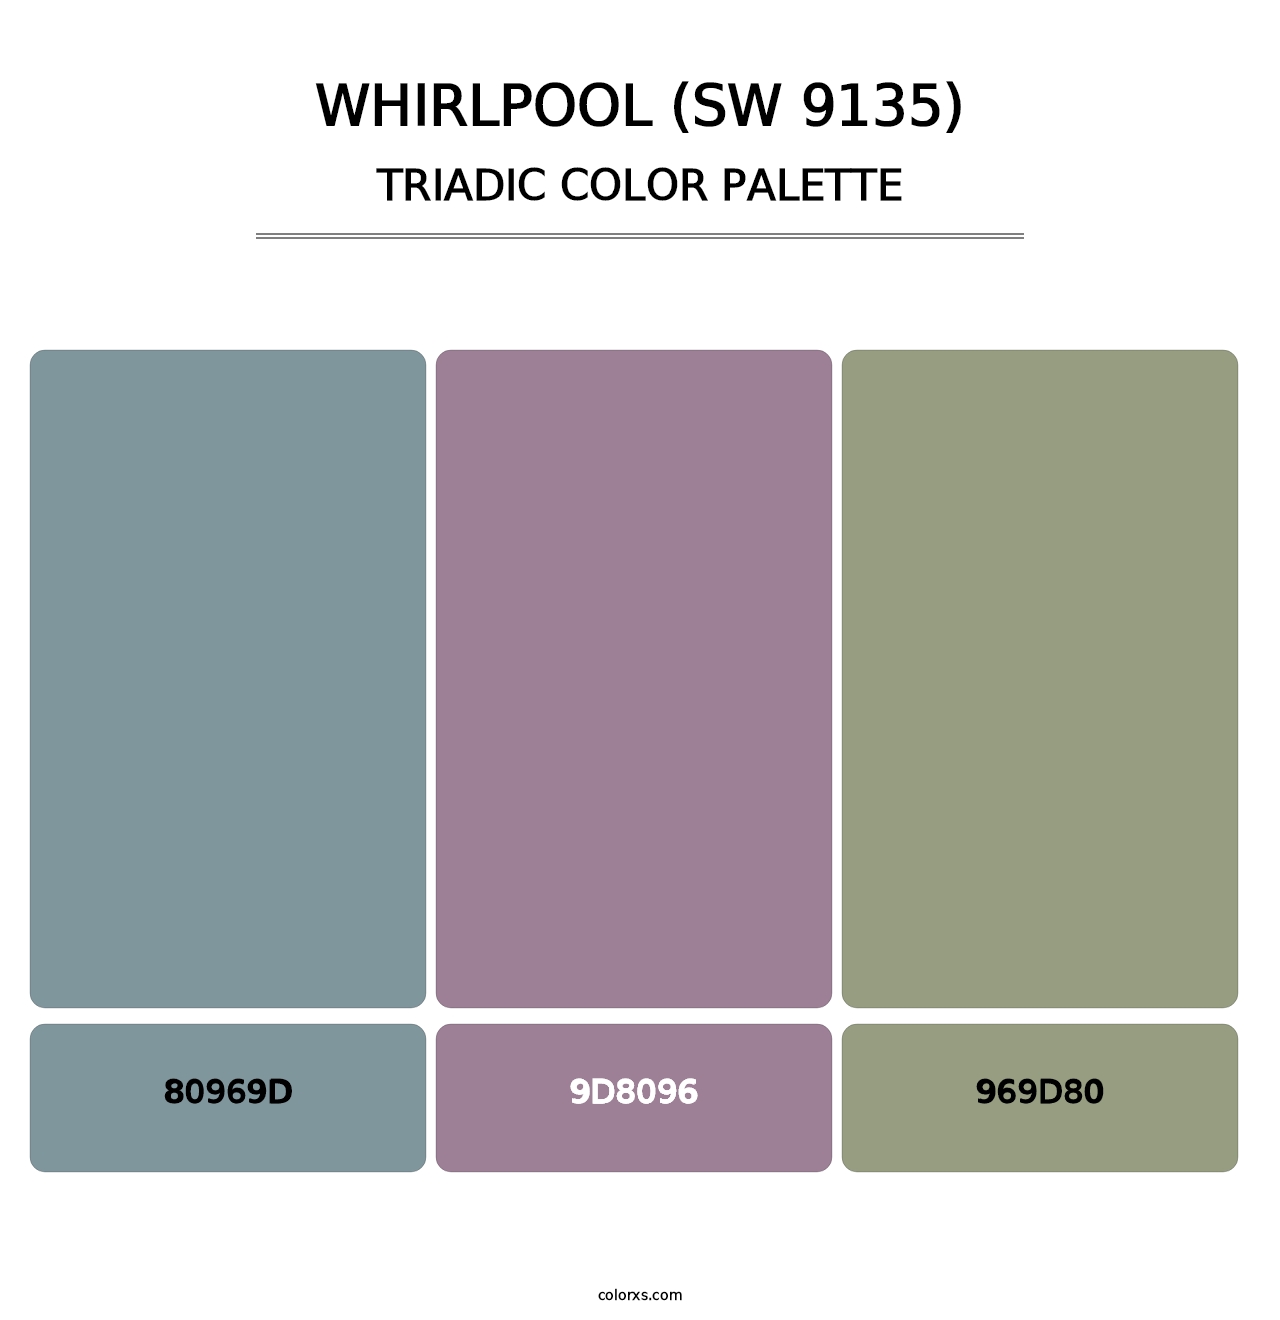 Whirlpool (SW 9135) - Triadic Color Palette